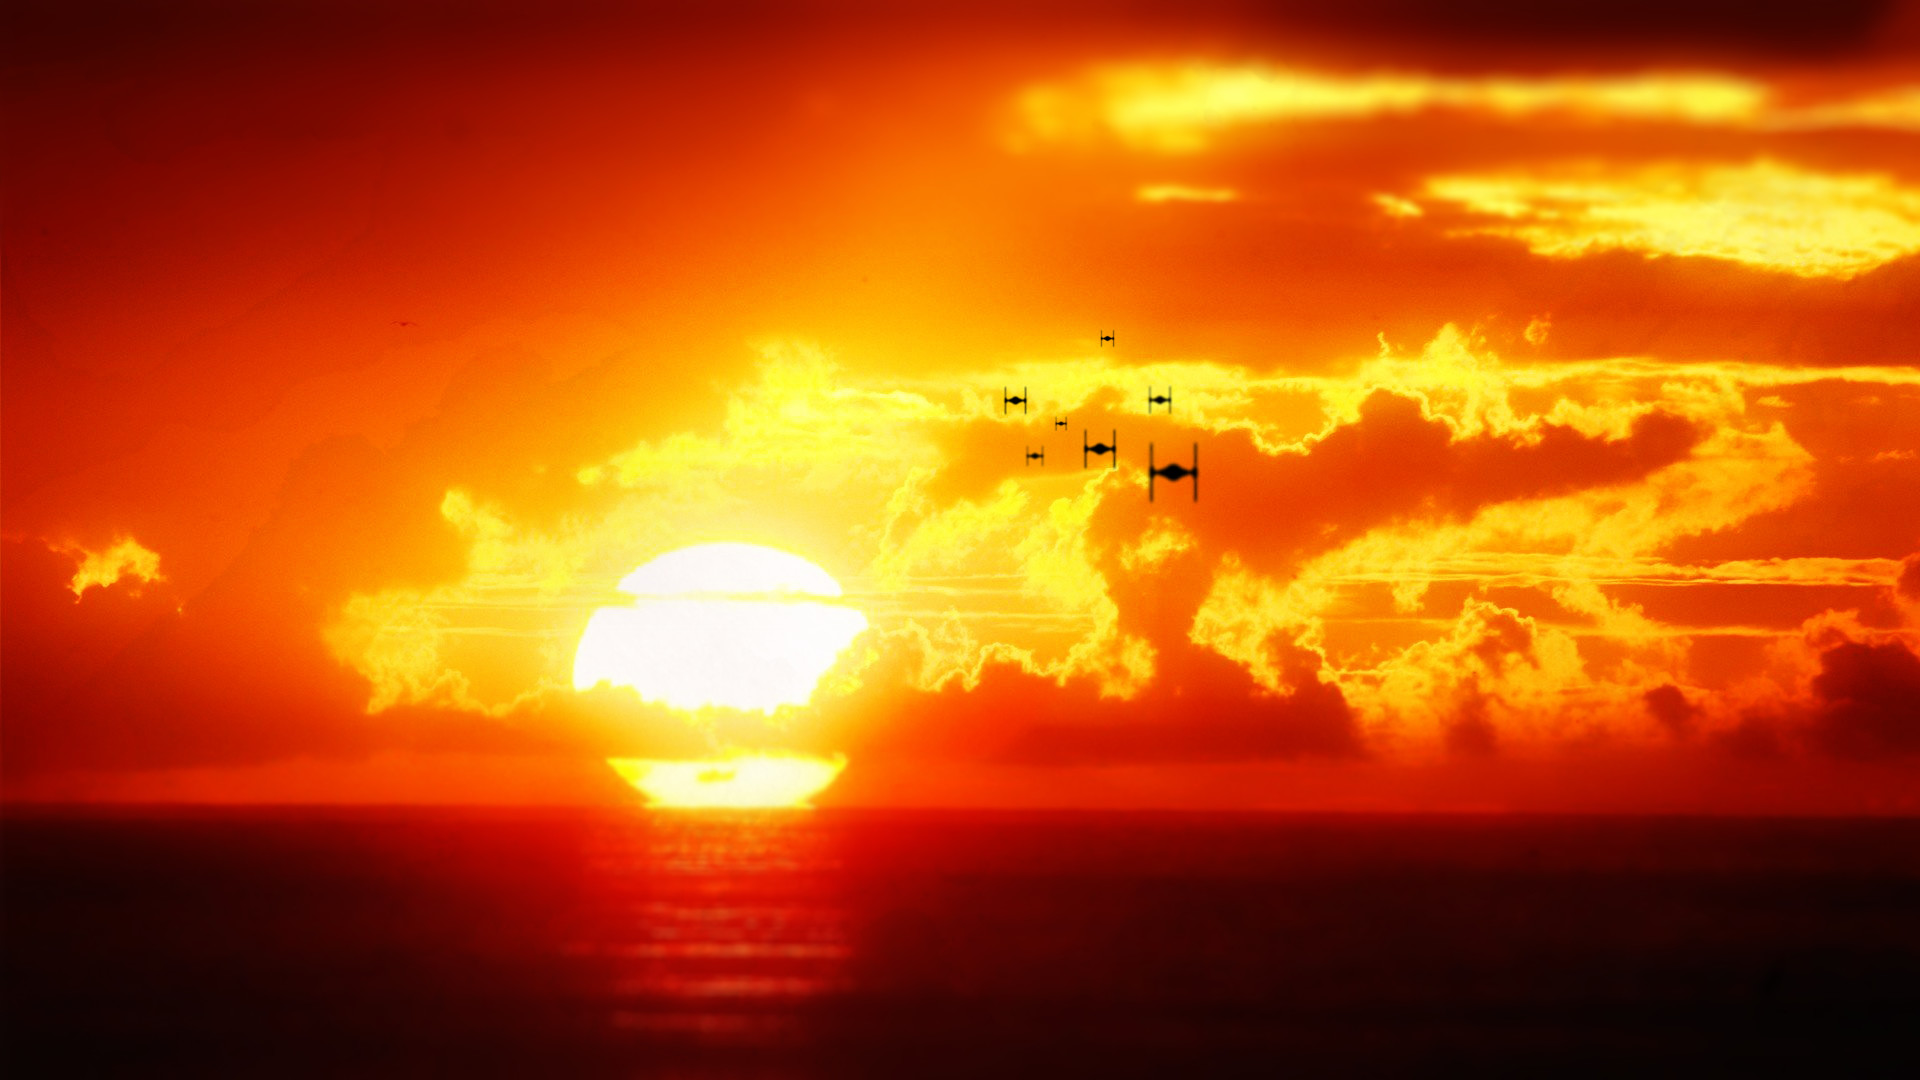 Star Wars Tie Fighter Sunset Wallpaper by NIHILUSDESIGNS